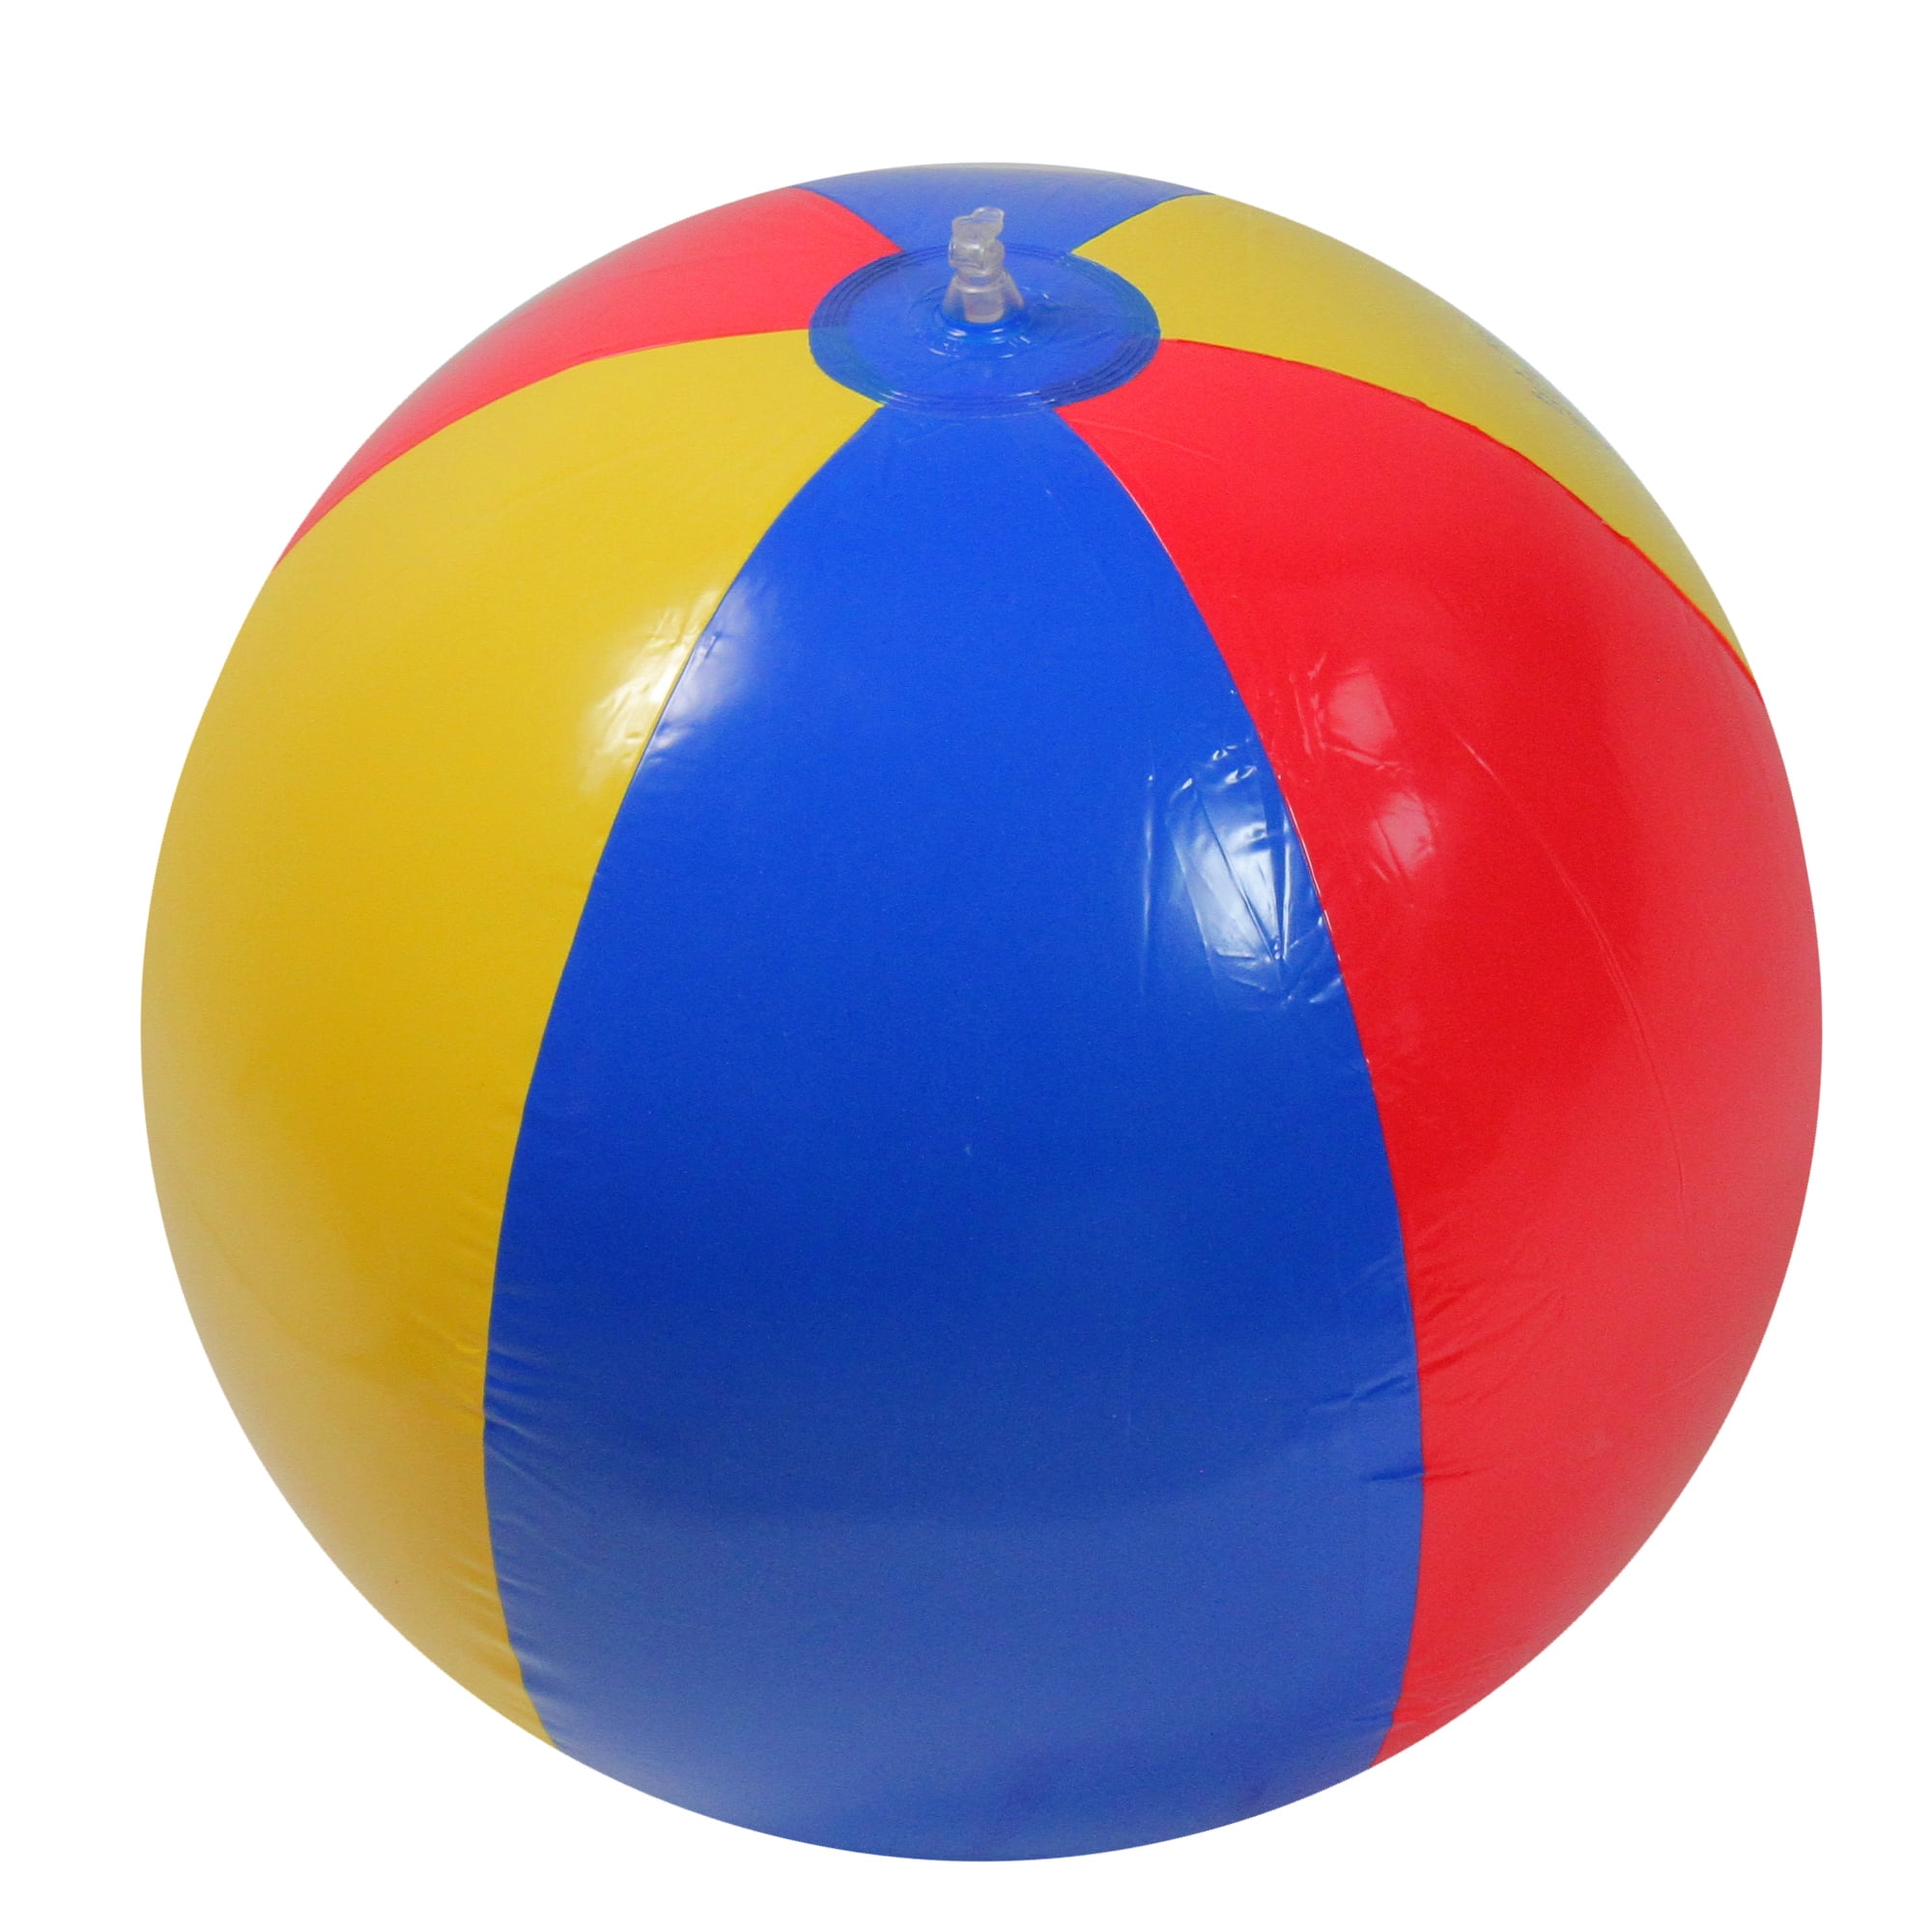 6 x 9" TRANSLUCENT COLOUR INFLATABLE BLOW UP BEACH BALLS BALL Red Yellow or Blue 